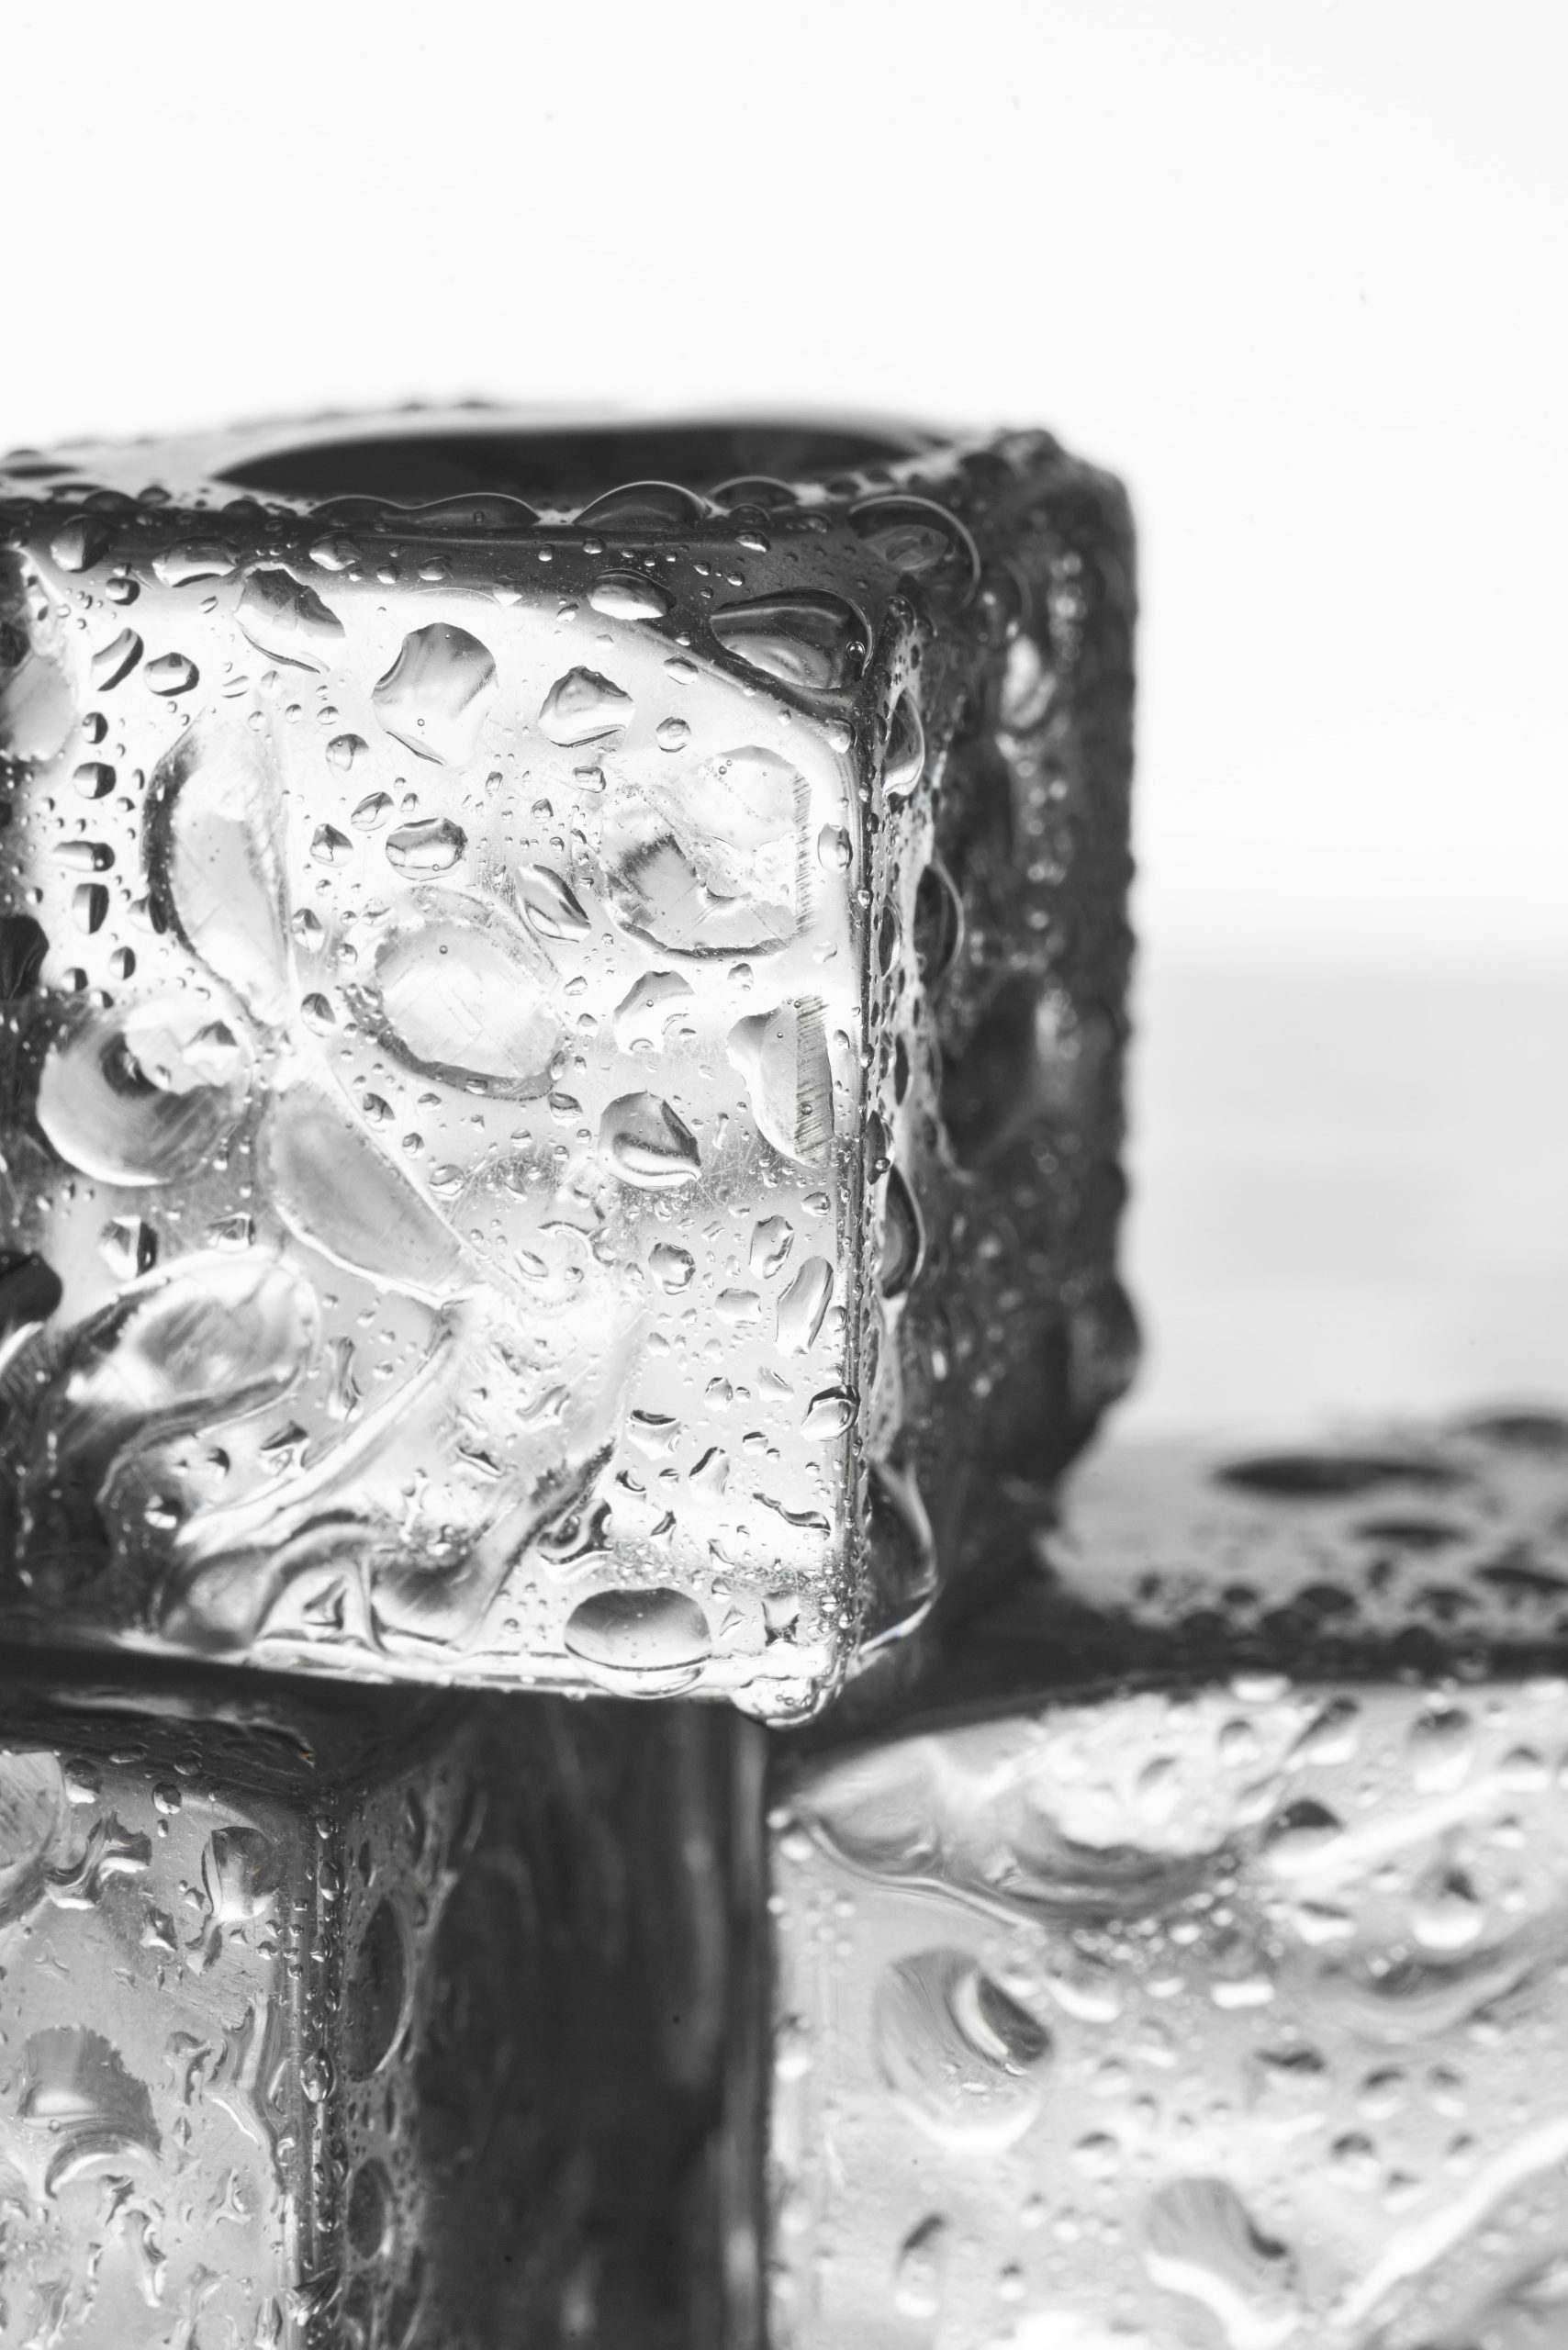 How to Make Ice Last Longer and Keep it from Melting: Expert Tips and Tricks